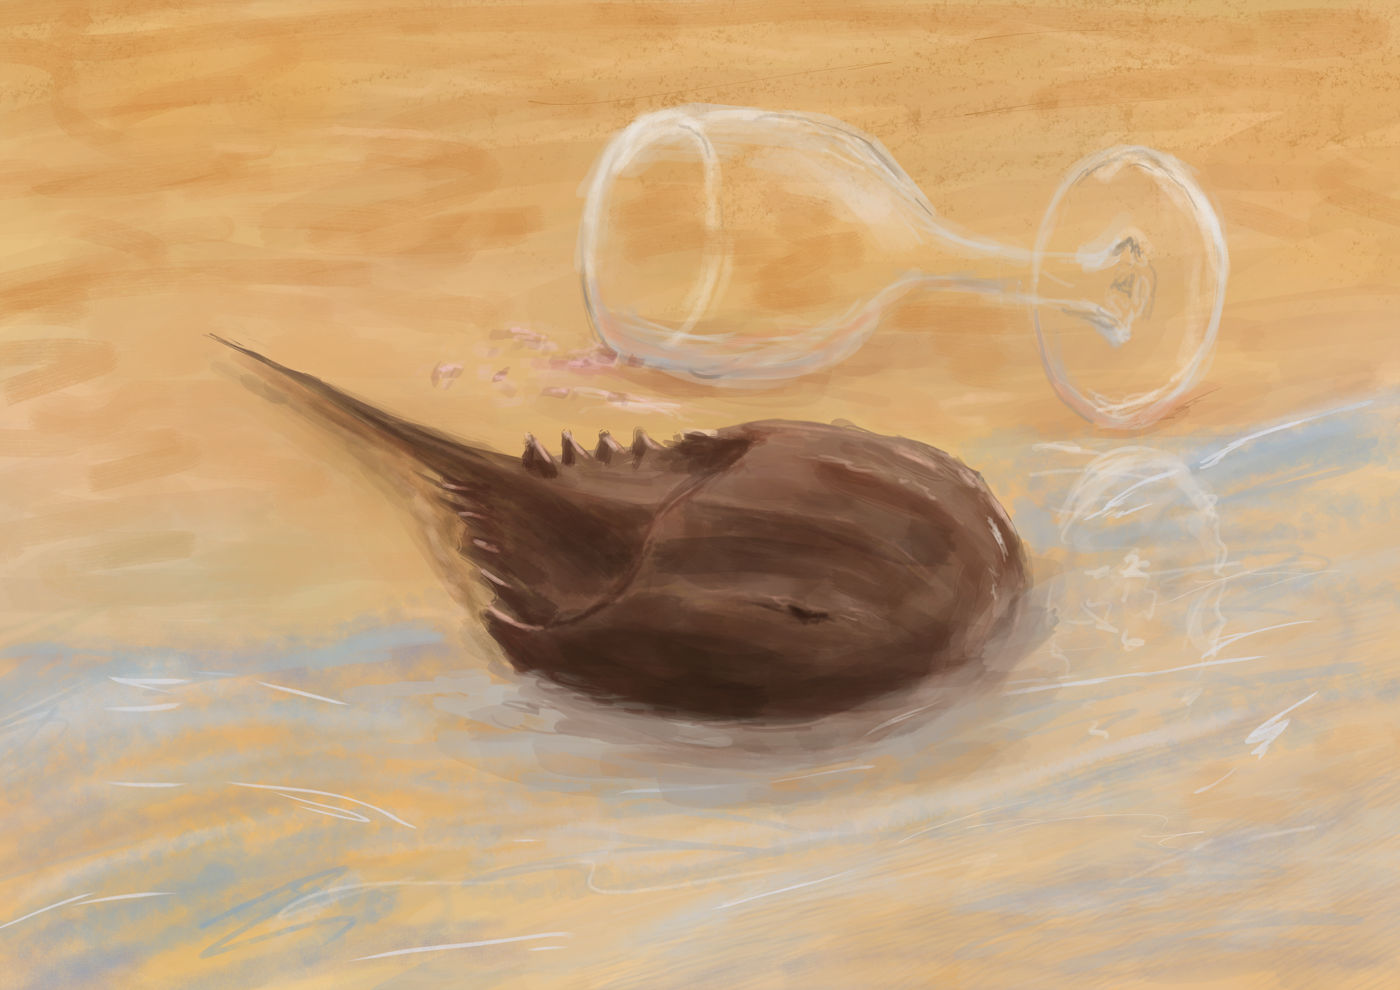 A horseshoe crab seemingly passed out on a beach as the waves roll over it, with an empty wine glass on its side nearby. A few drops of reddish wine-like liquid are around the rim.